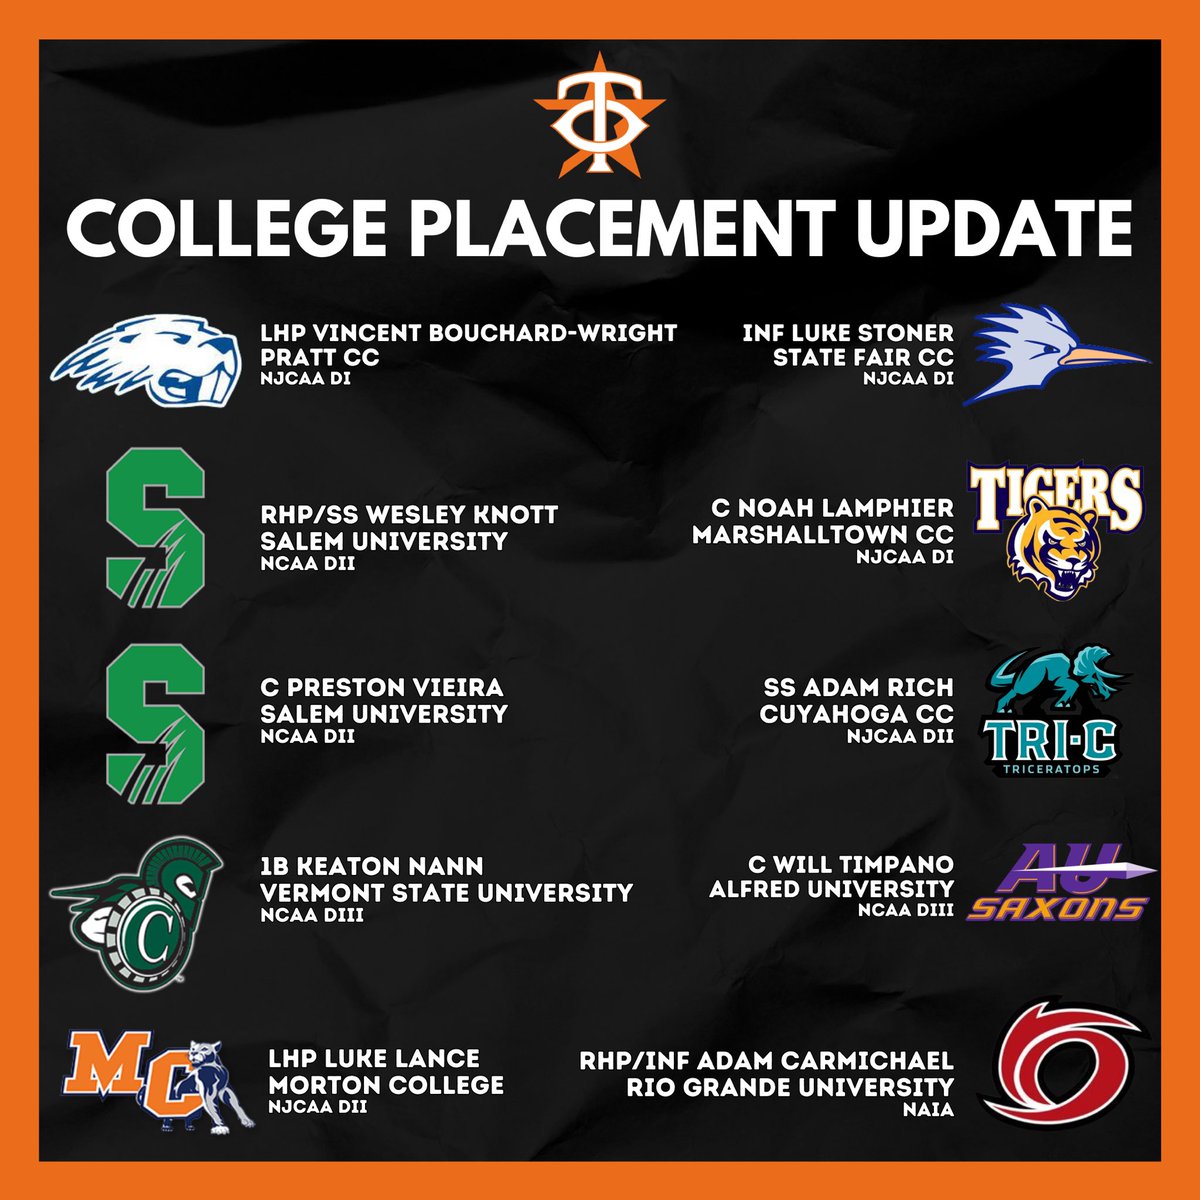 𝐂𝐎𝐋𝐋𝐄𝐆𝐄 𝐂𝐎𝐌𝐌𝐈𝐓𝐌𝐄𝐍𝐓 𝐔𝐏𝐃𝐀𝐓𝐄 We now have 20 college commitments from our 2024’s heading into February‼️ #TeamO🟠